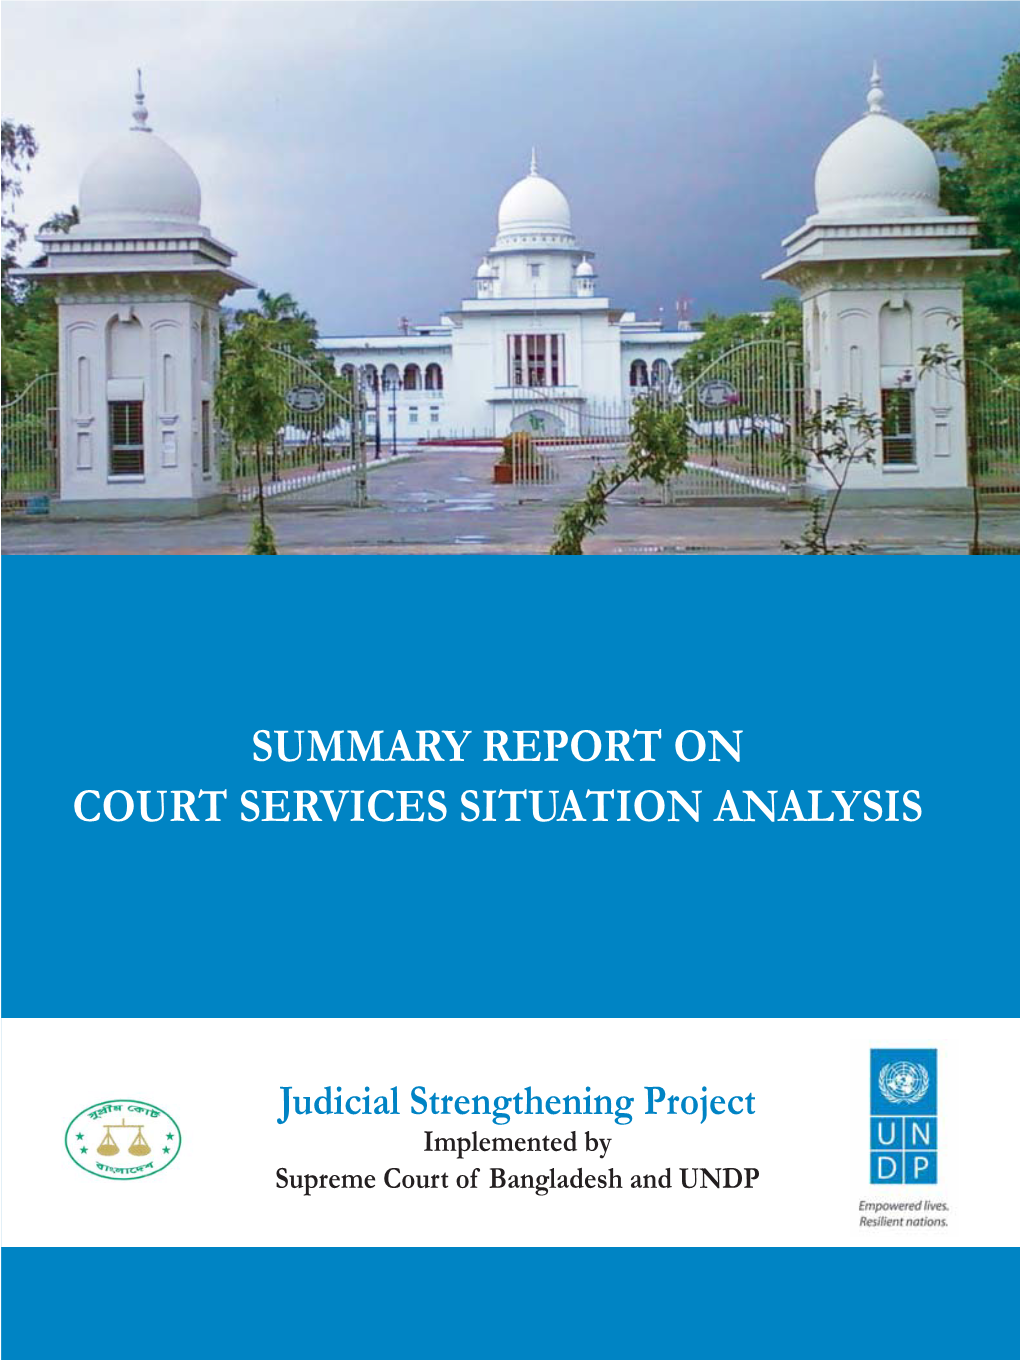 Supreme Court of Bangladesh and UNDP Summary Report on Court Services Situation Analysis